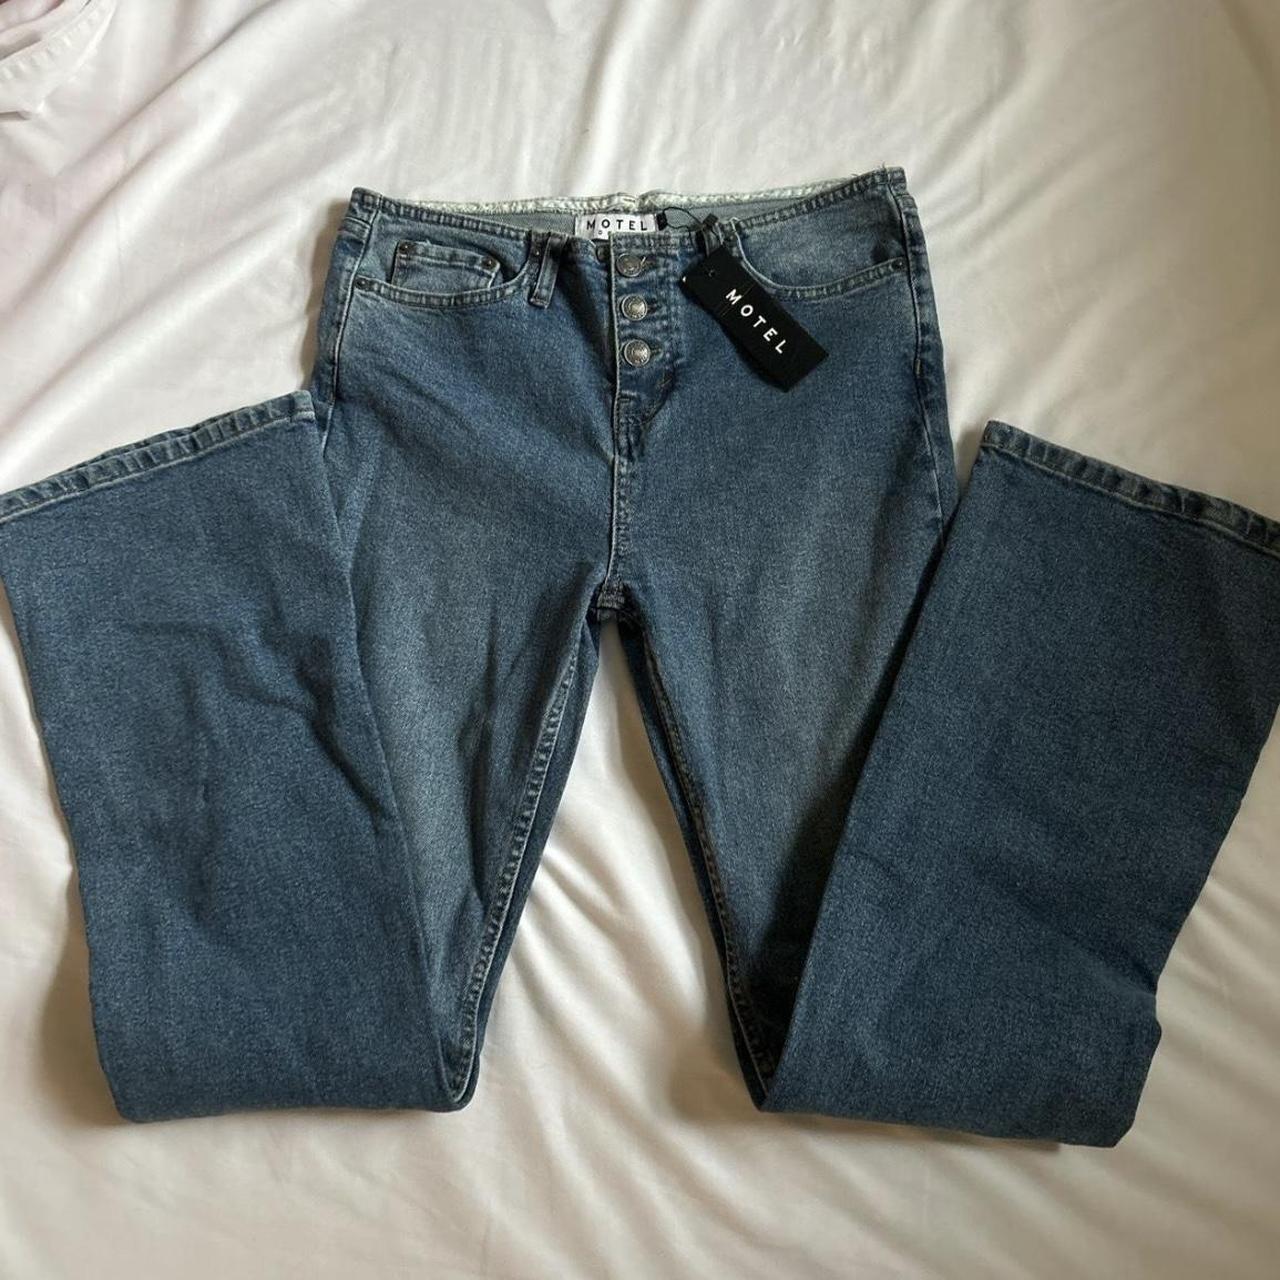 NWT Motel low rise exposed button jeans 31” inseam - Depop